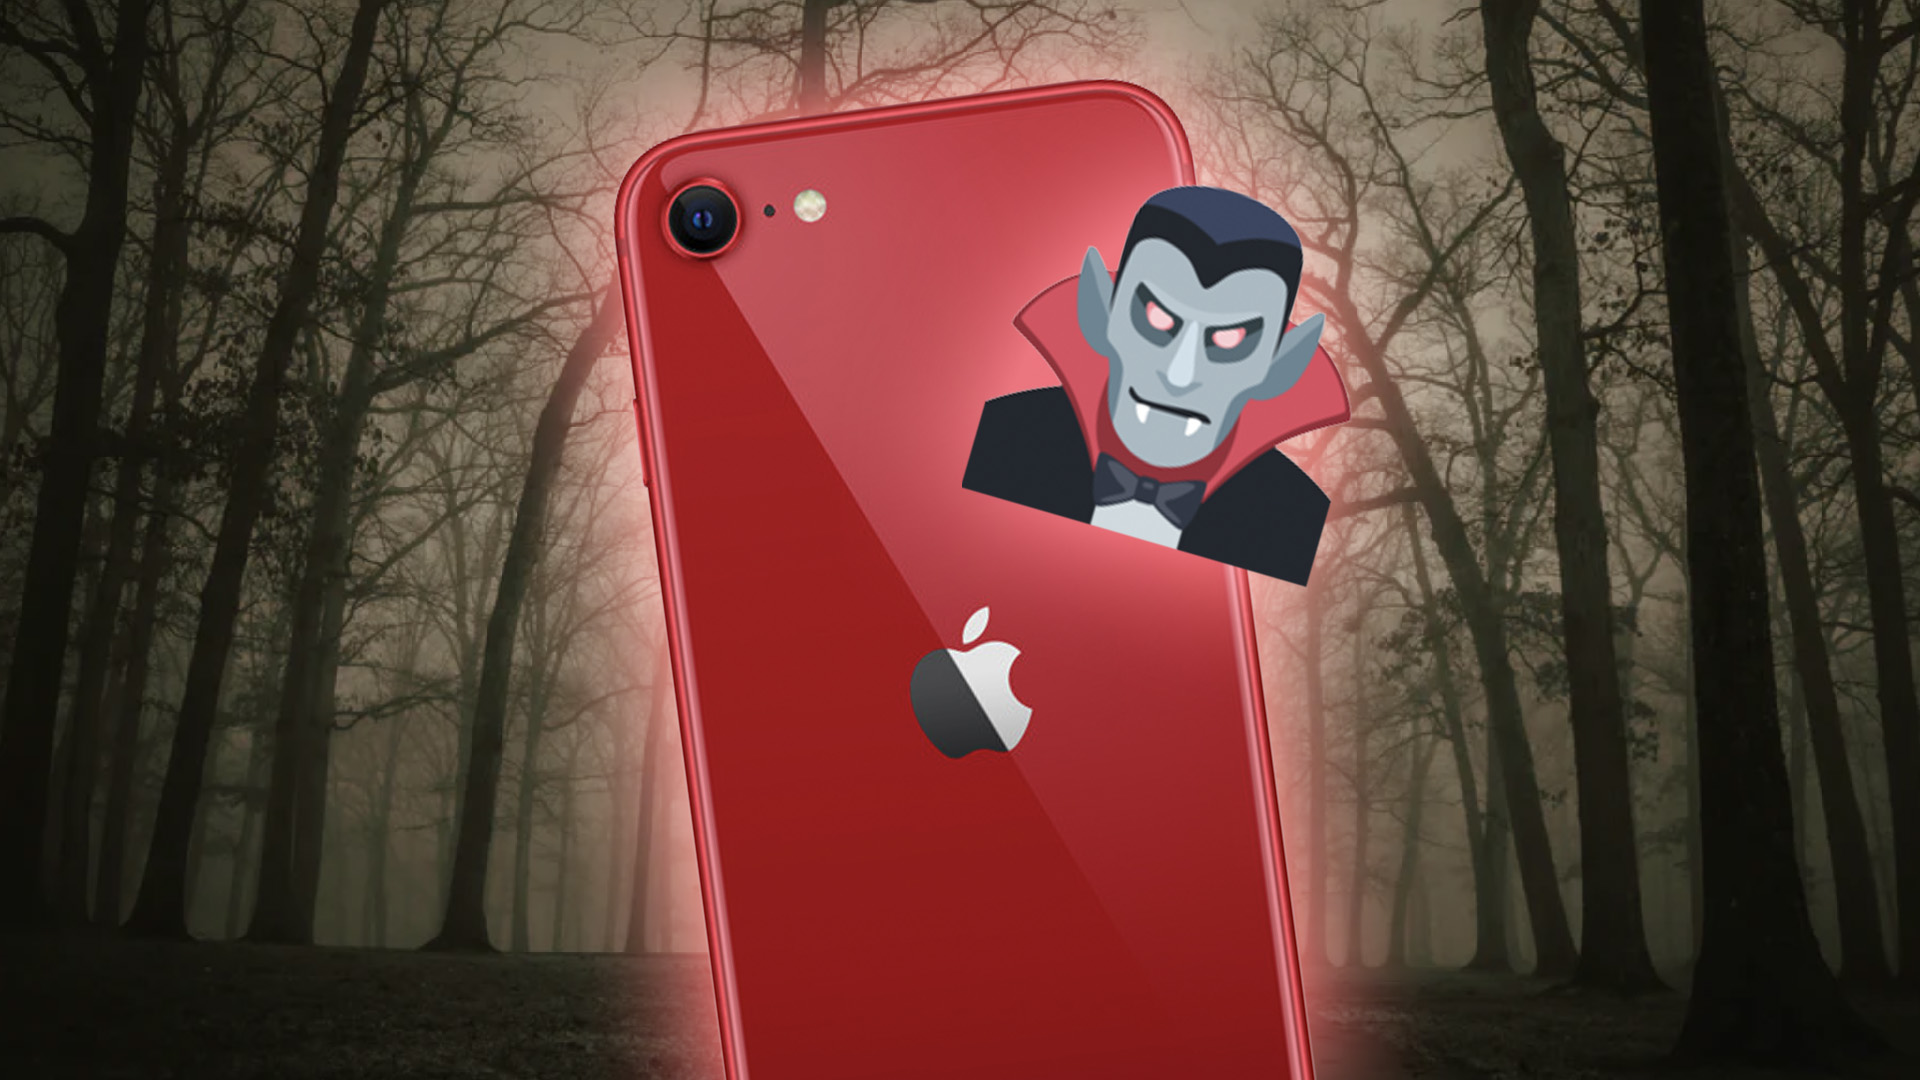 How to locate VAMPIRE iPhone bills that drain your bank account each month